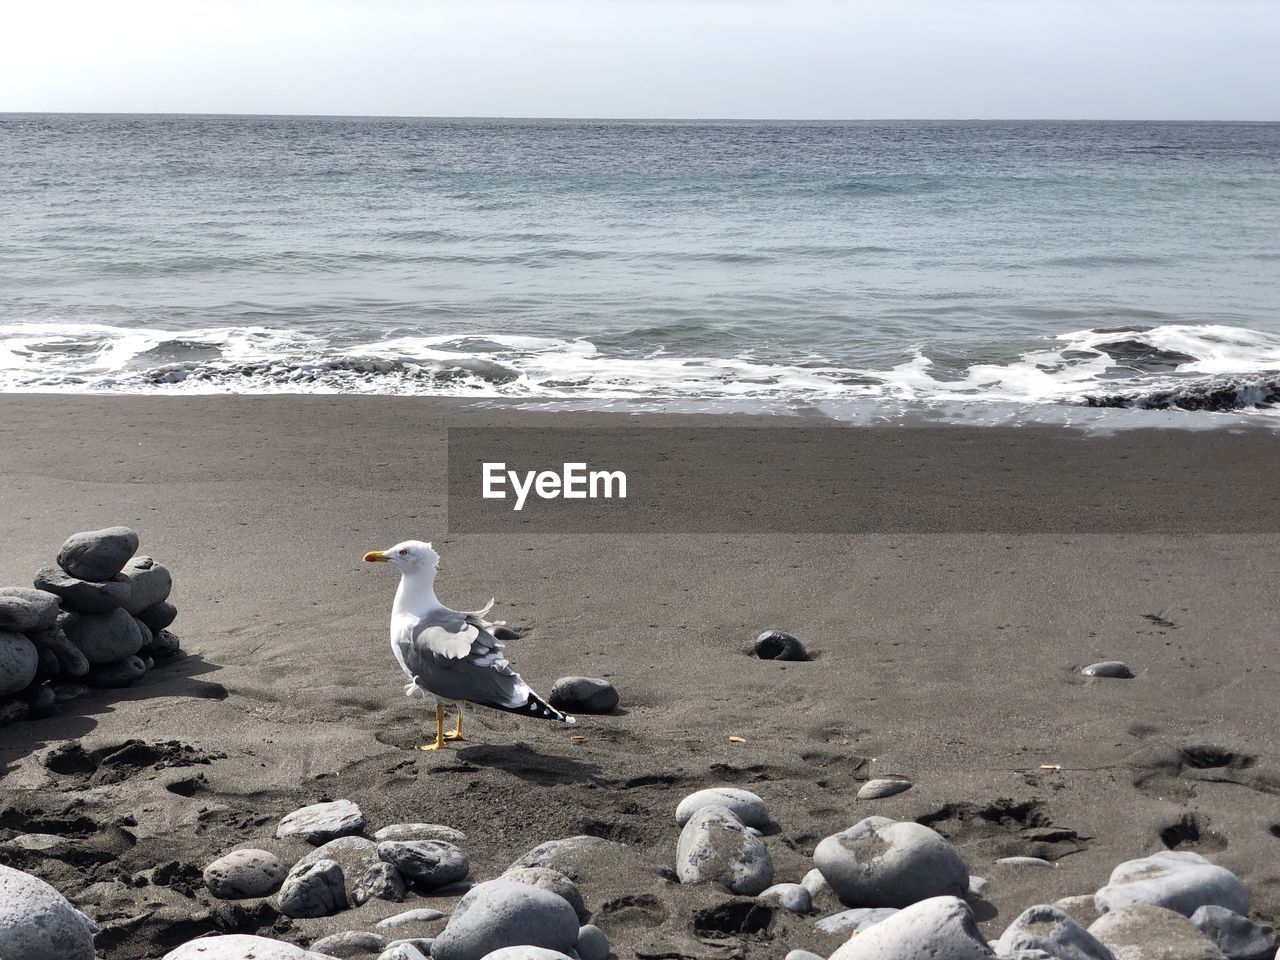 VIEW OF SEAGULLS ON BEACH